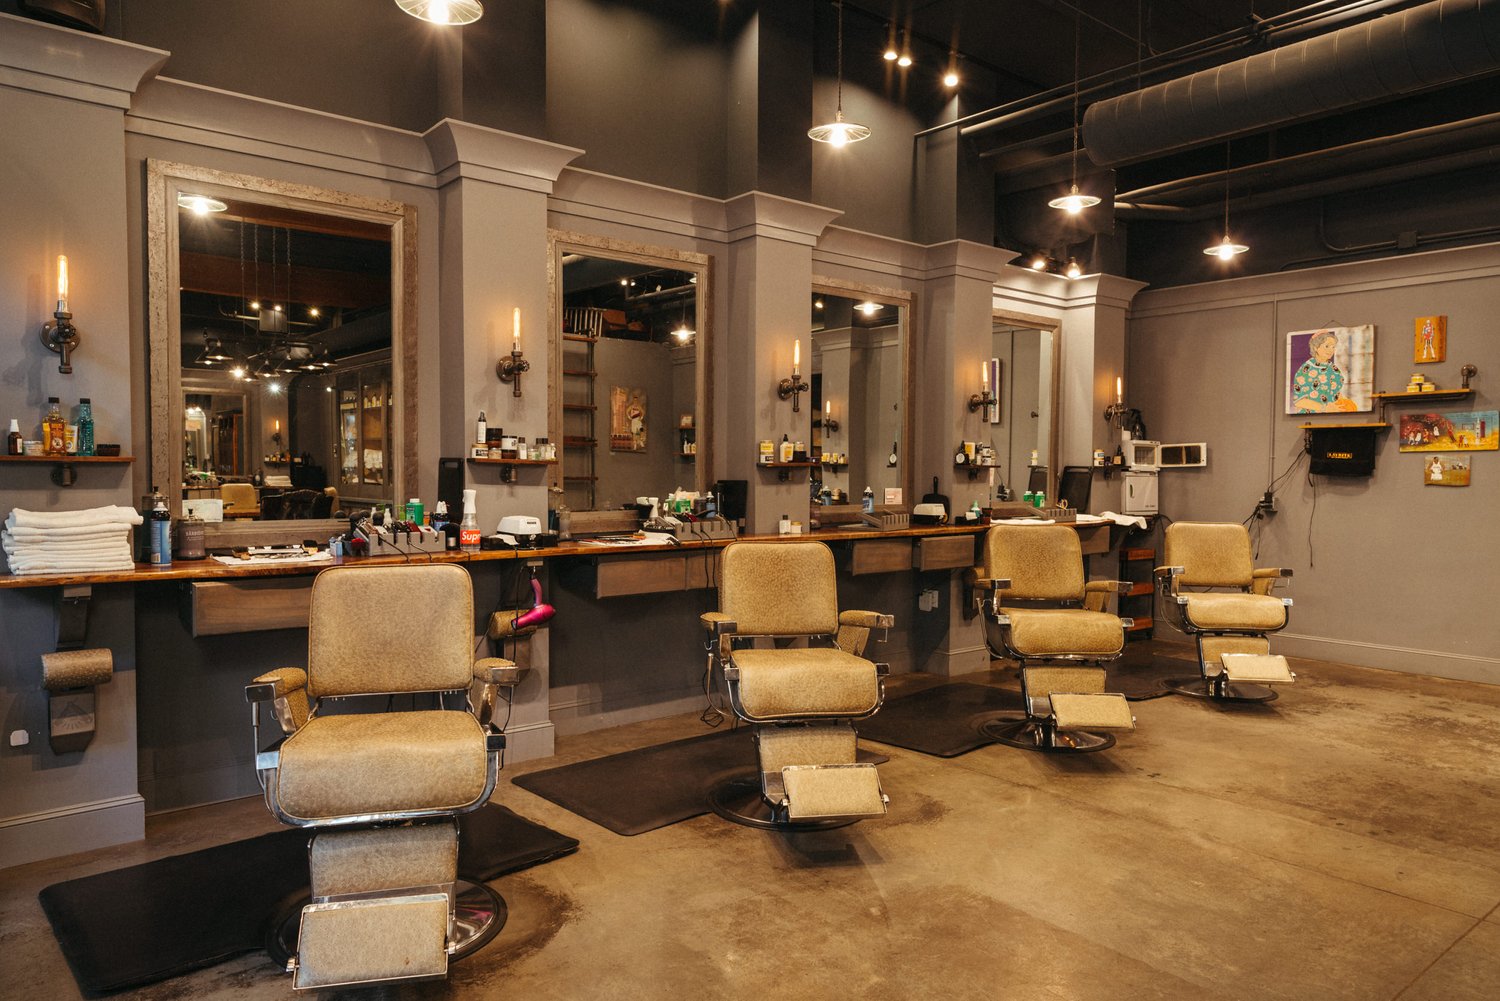 Cloak & Dagger Barber Co. Portland's Premier Barbershop and Shave Parlor.  We offer traditional and modern mens haircuts